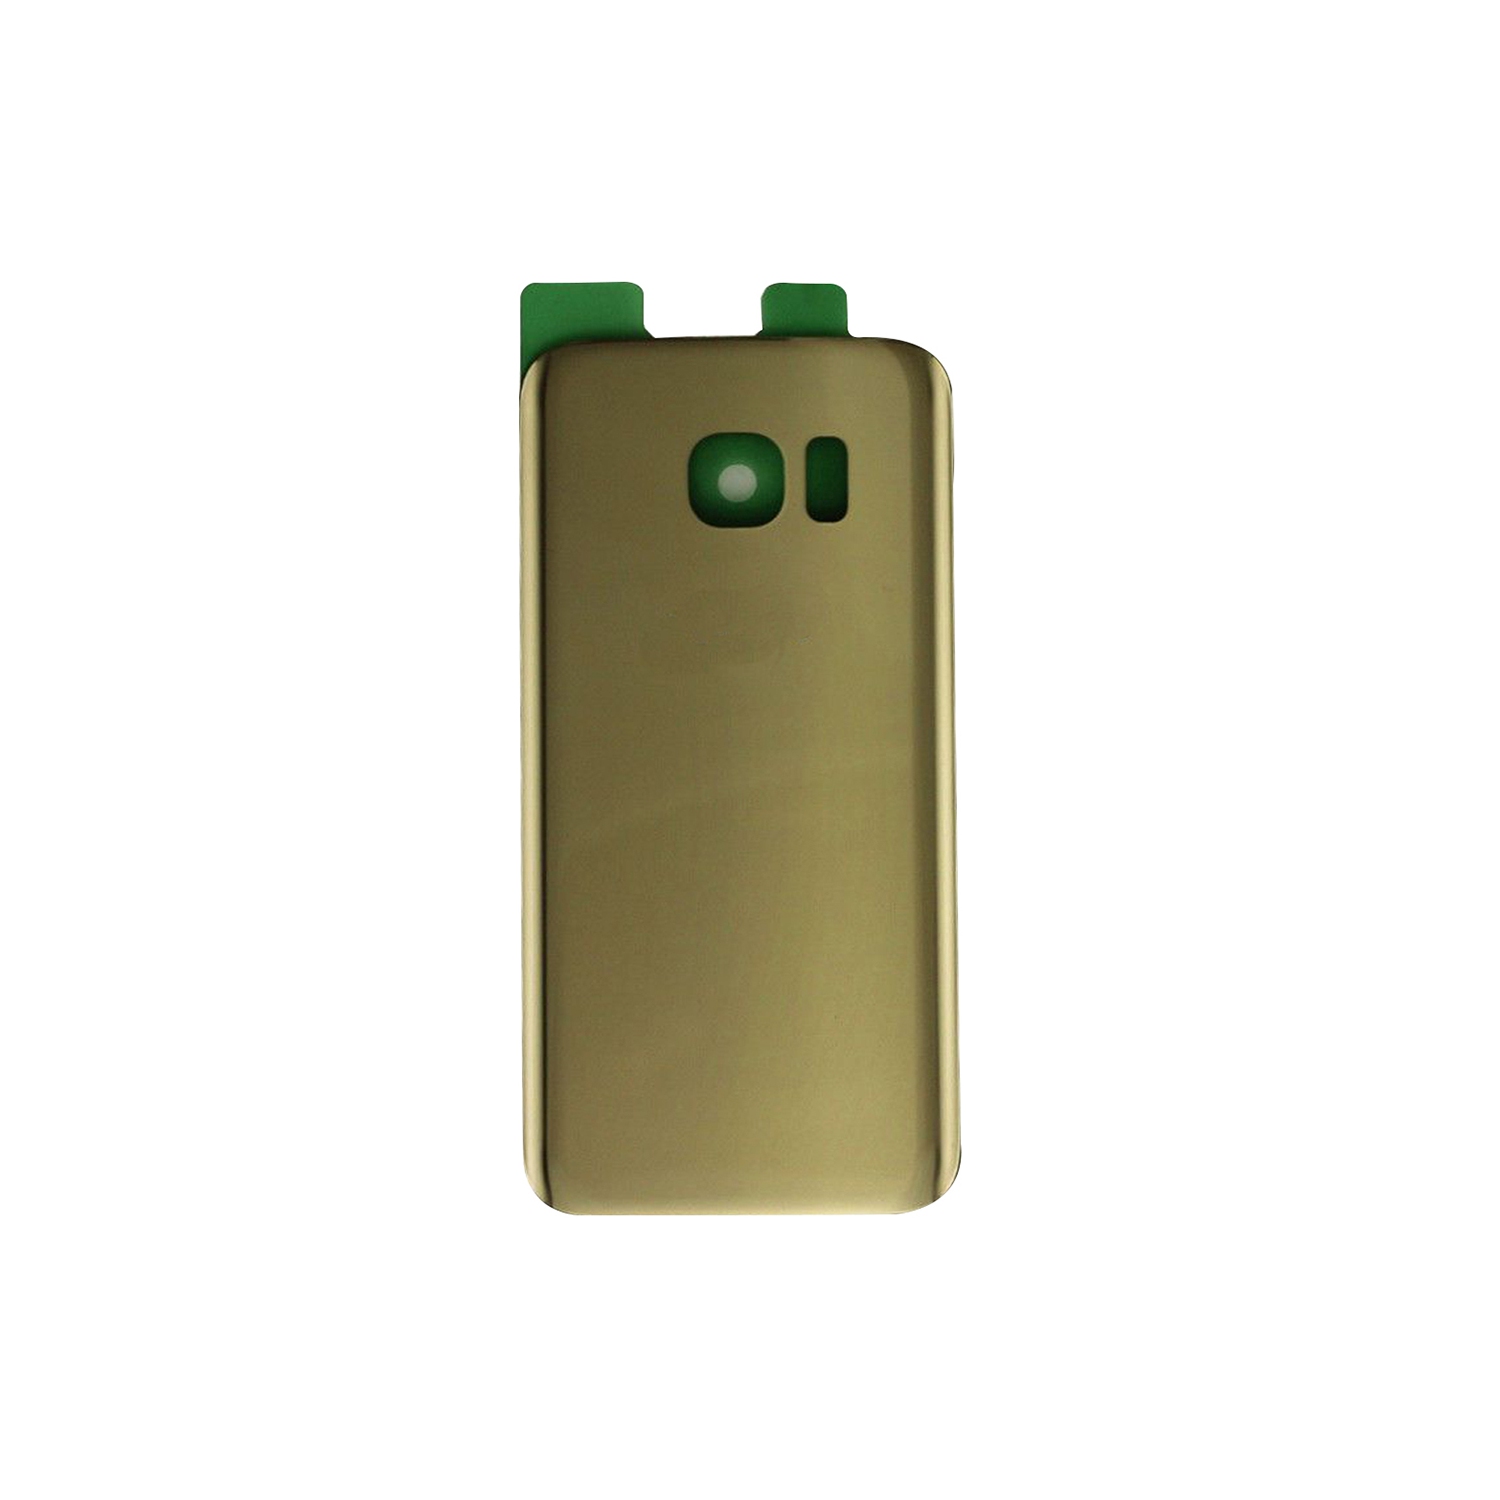 Samsung Galaxy S7 Edge G935W8 Back Housing Battery Door Cover Replacement - Gold